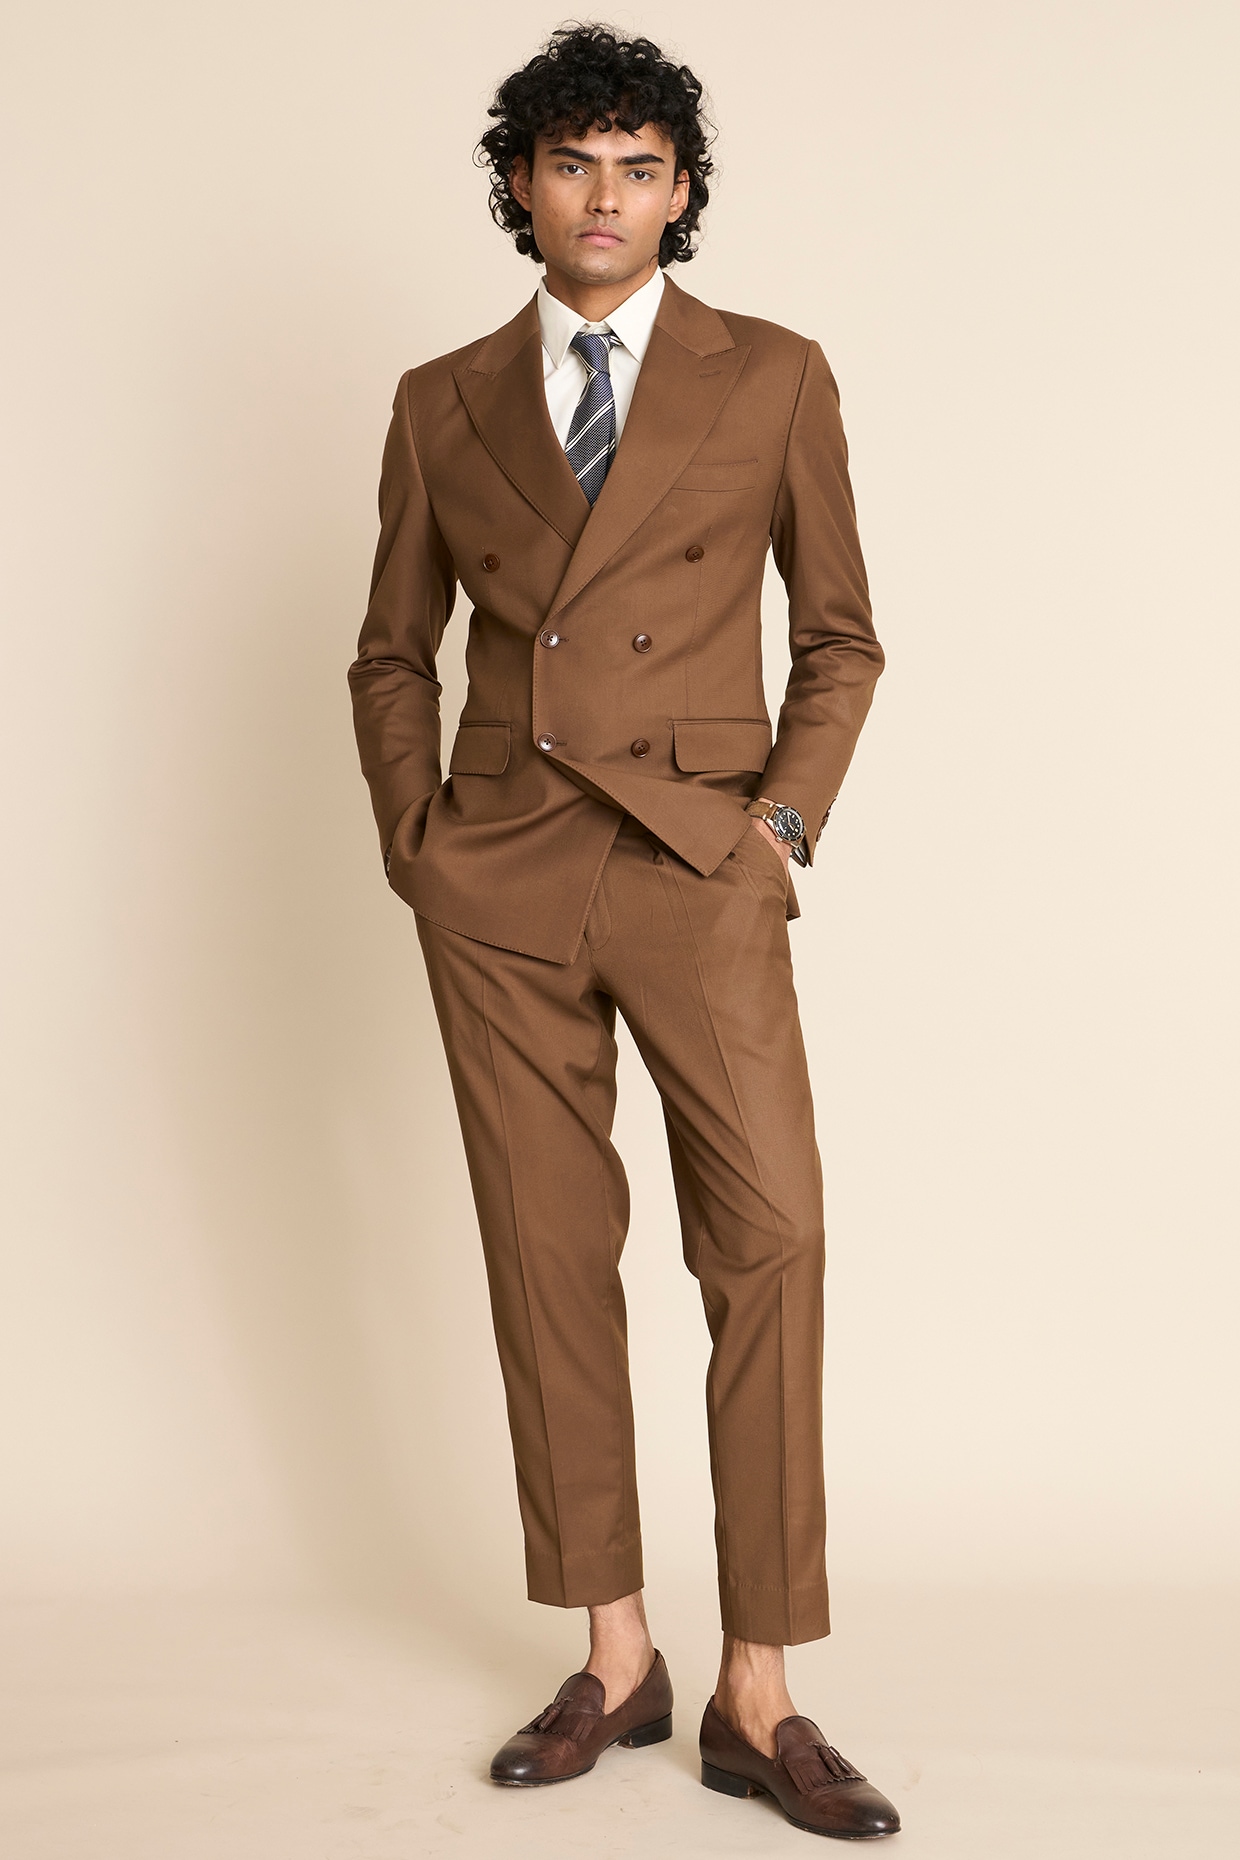 The Timeless Charm of a Men's Brown Plaid Wedding Suit — Hall Madden